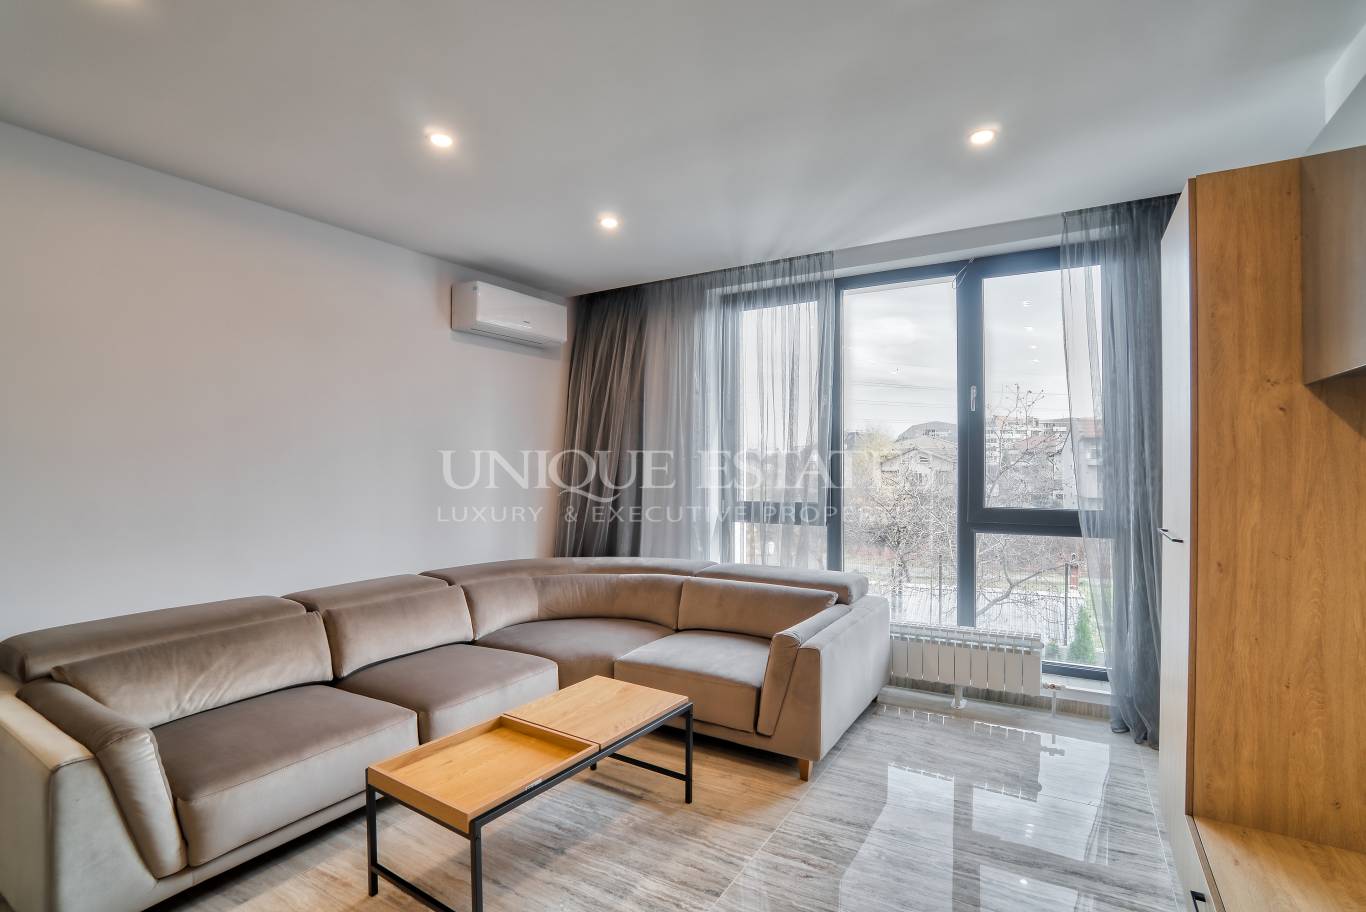 Apartment for rent in Sofia, Boyana with listing ID: N16421 - image 4